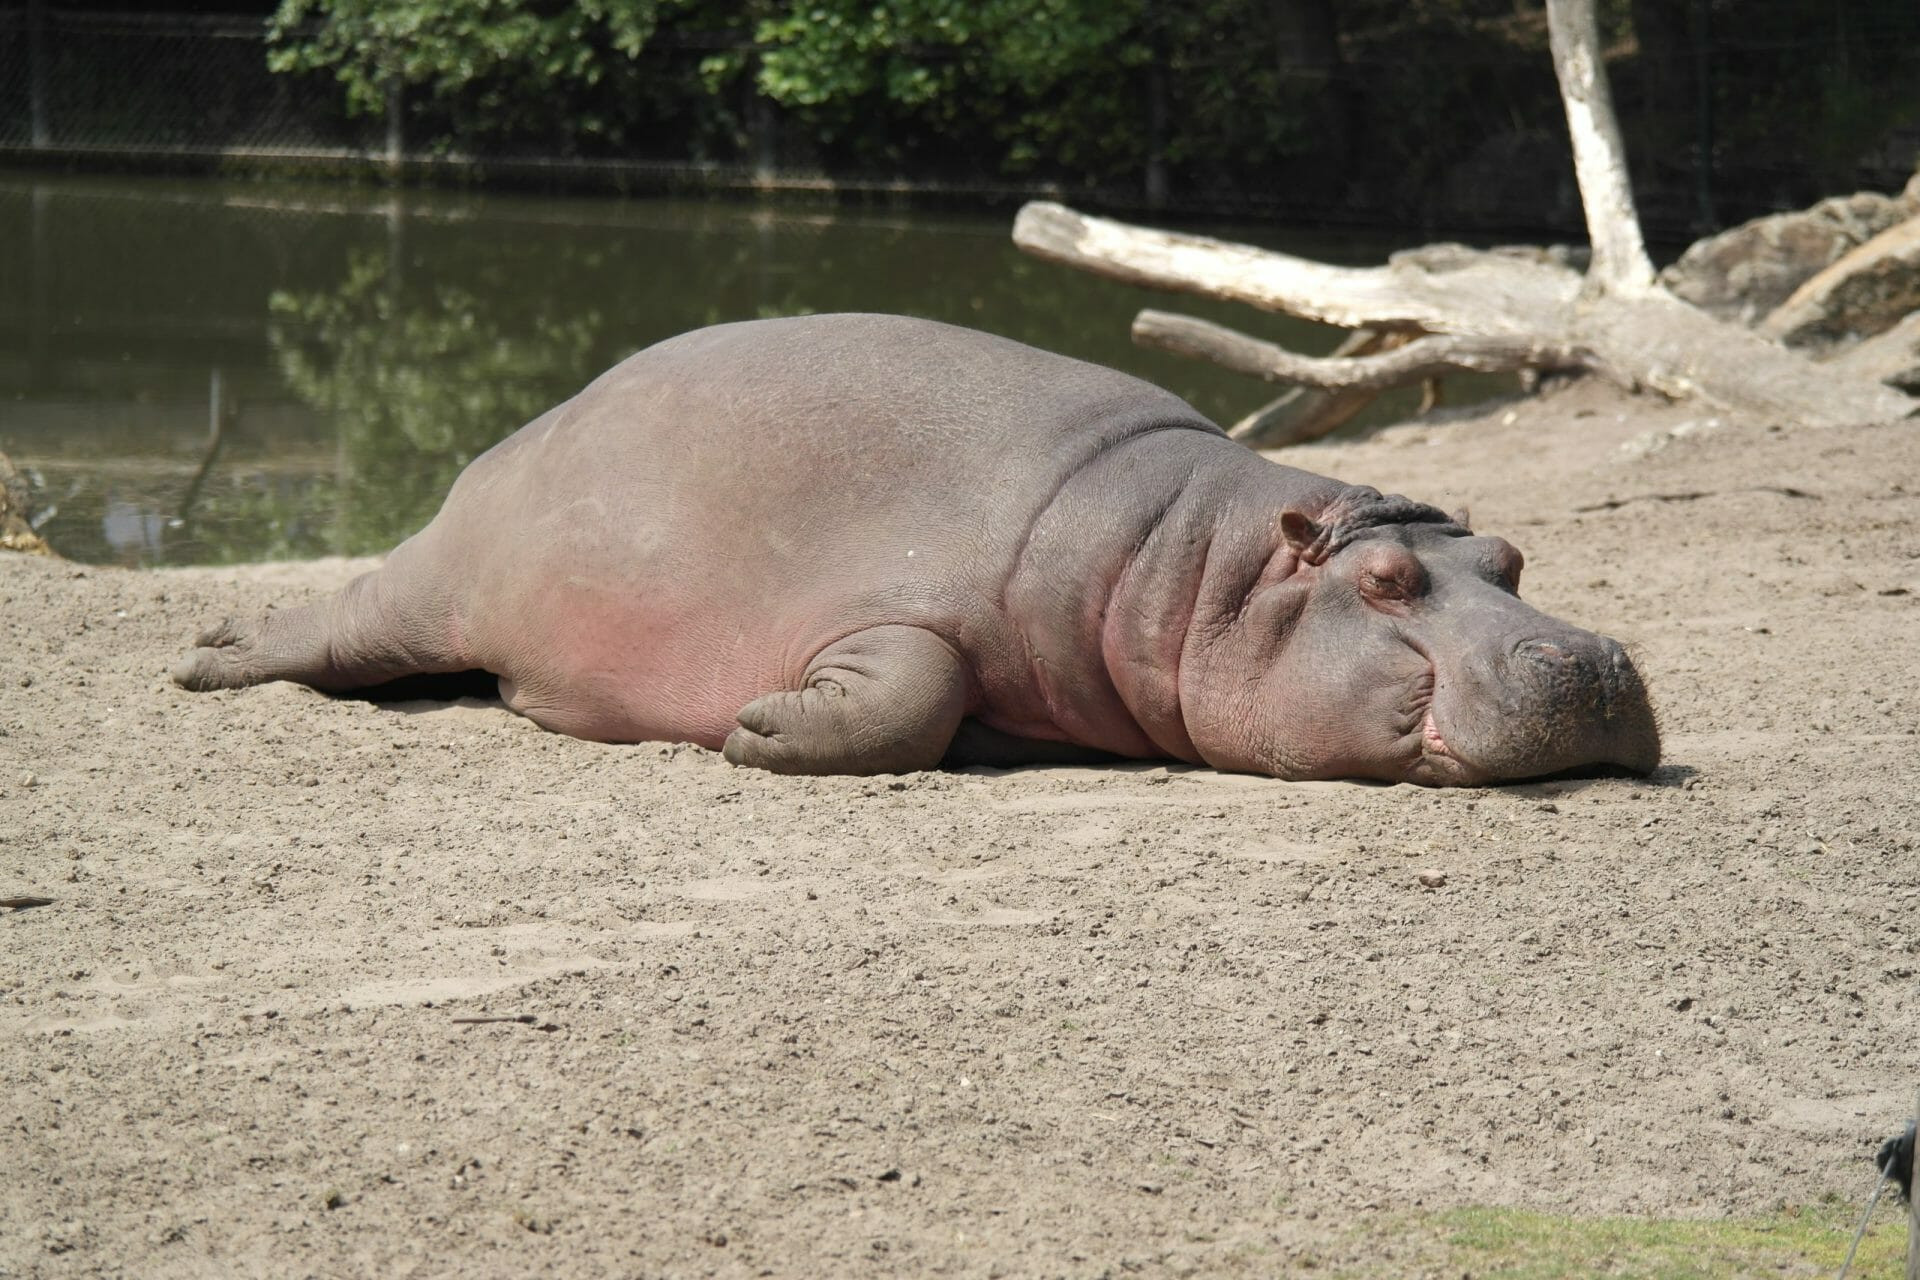 a hippopotamus sleeping to represent how to switch off from work on holiday